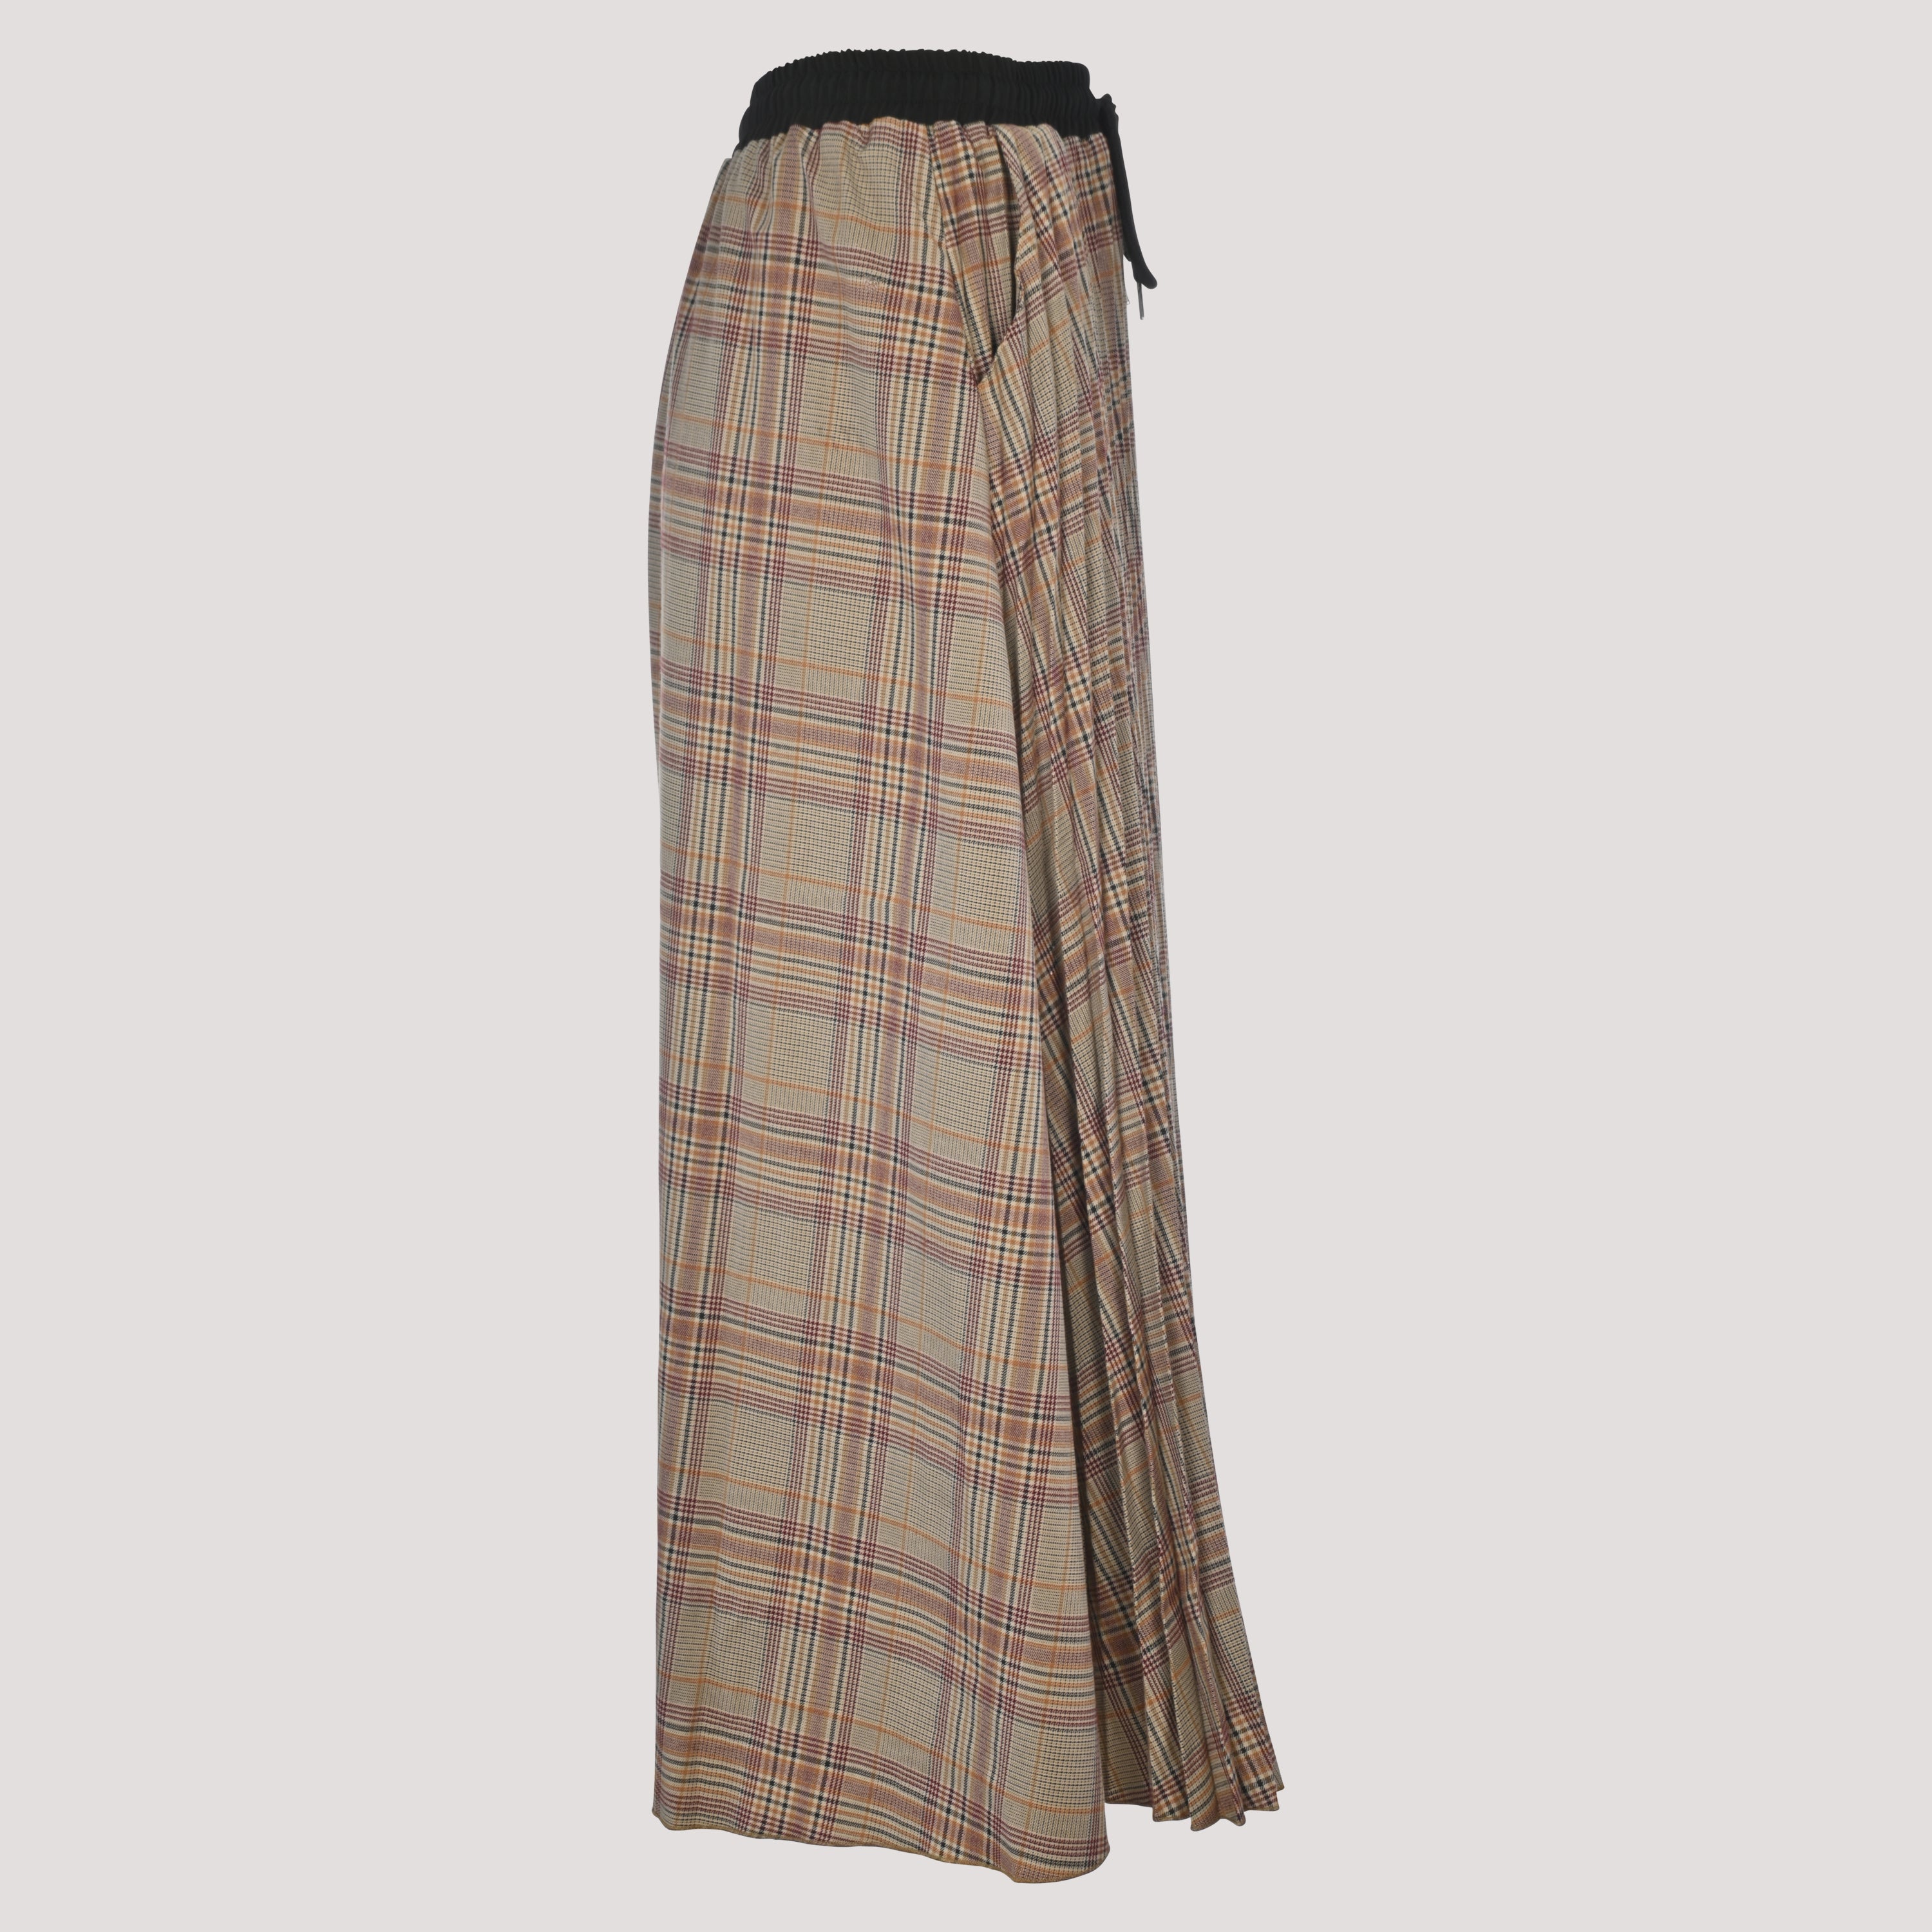 Plaid Maxi Skirt with Front Pleats